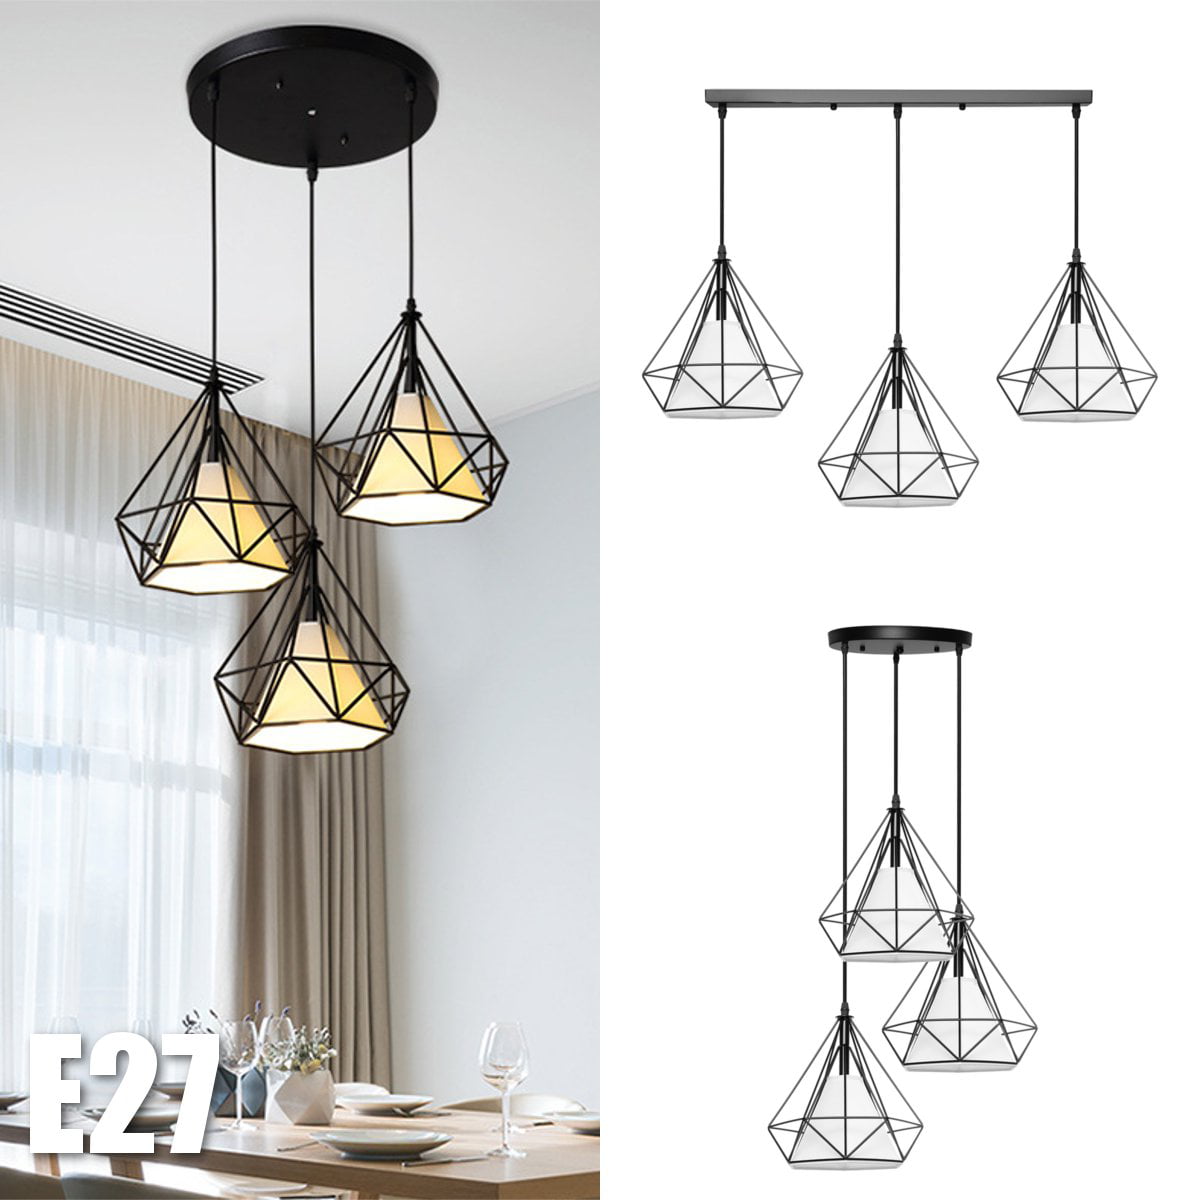 Chandelier Hanging Light Kitchen Lighting Ceiling Lights Fixtures With Long Round Plate For Dining Room Cafe Bar 3 Lights Walmart Canada